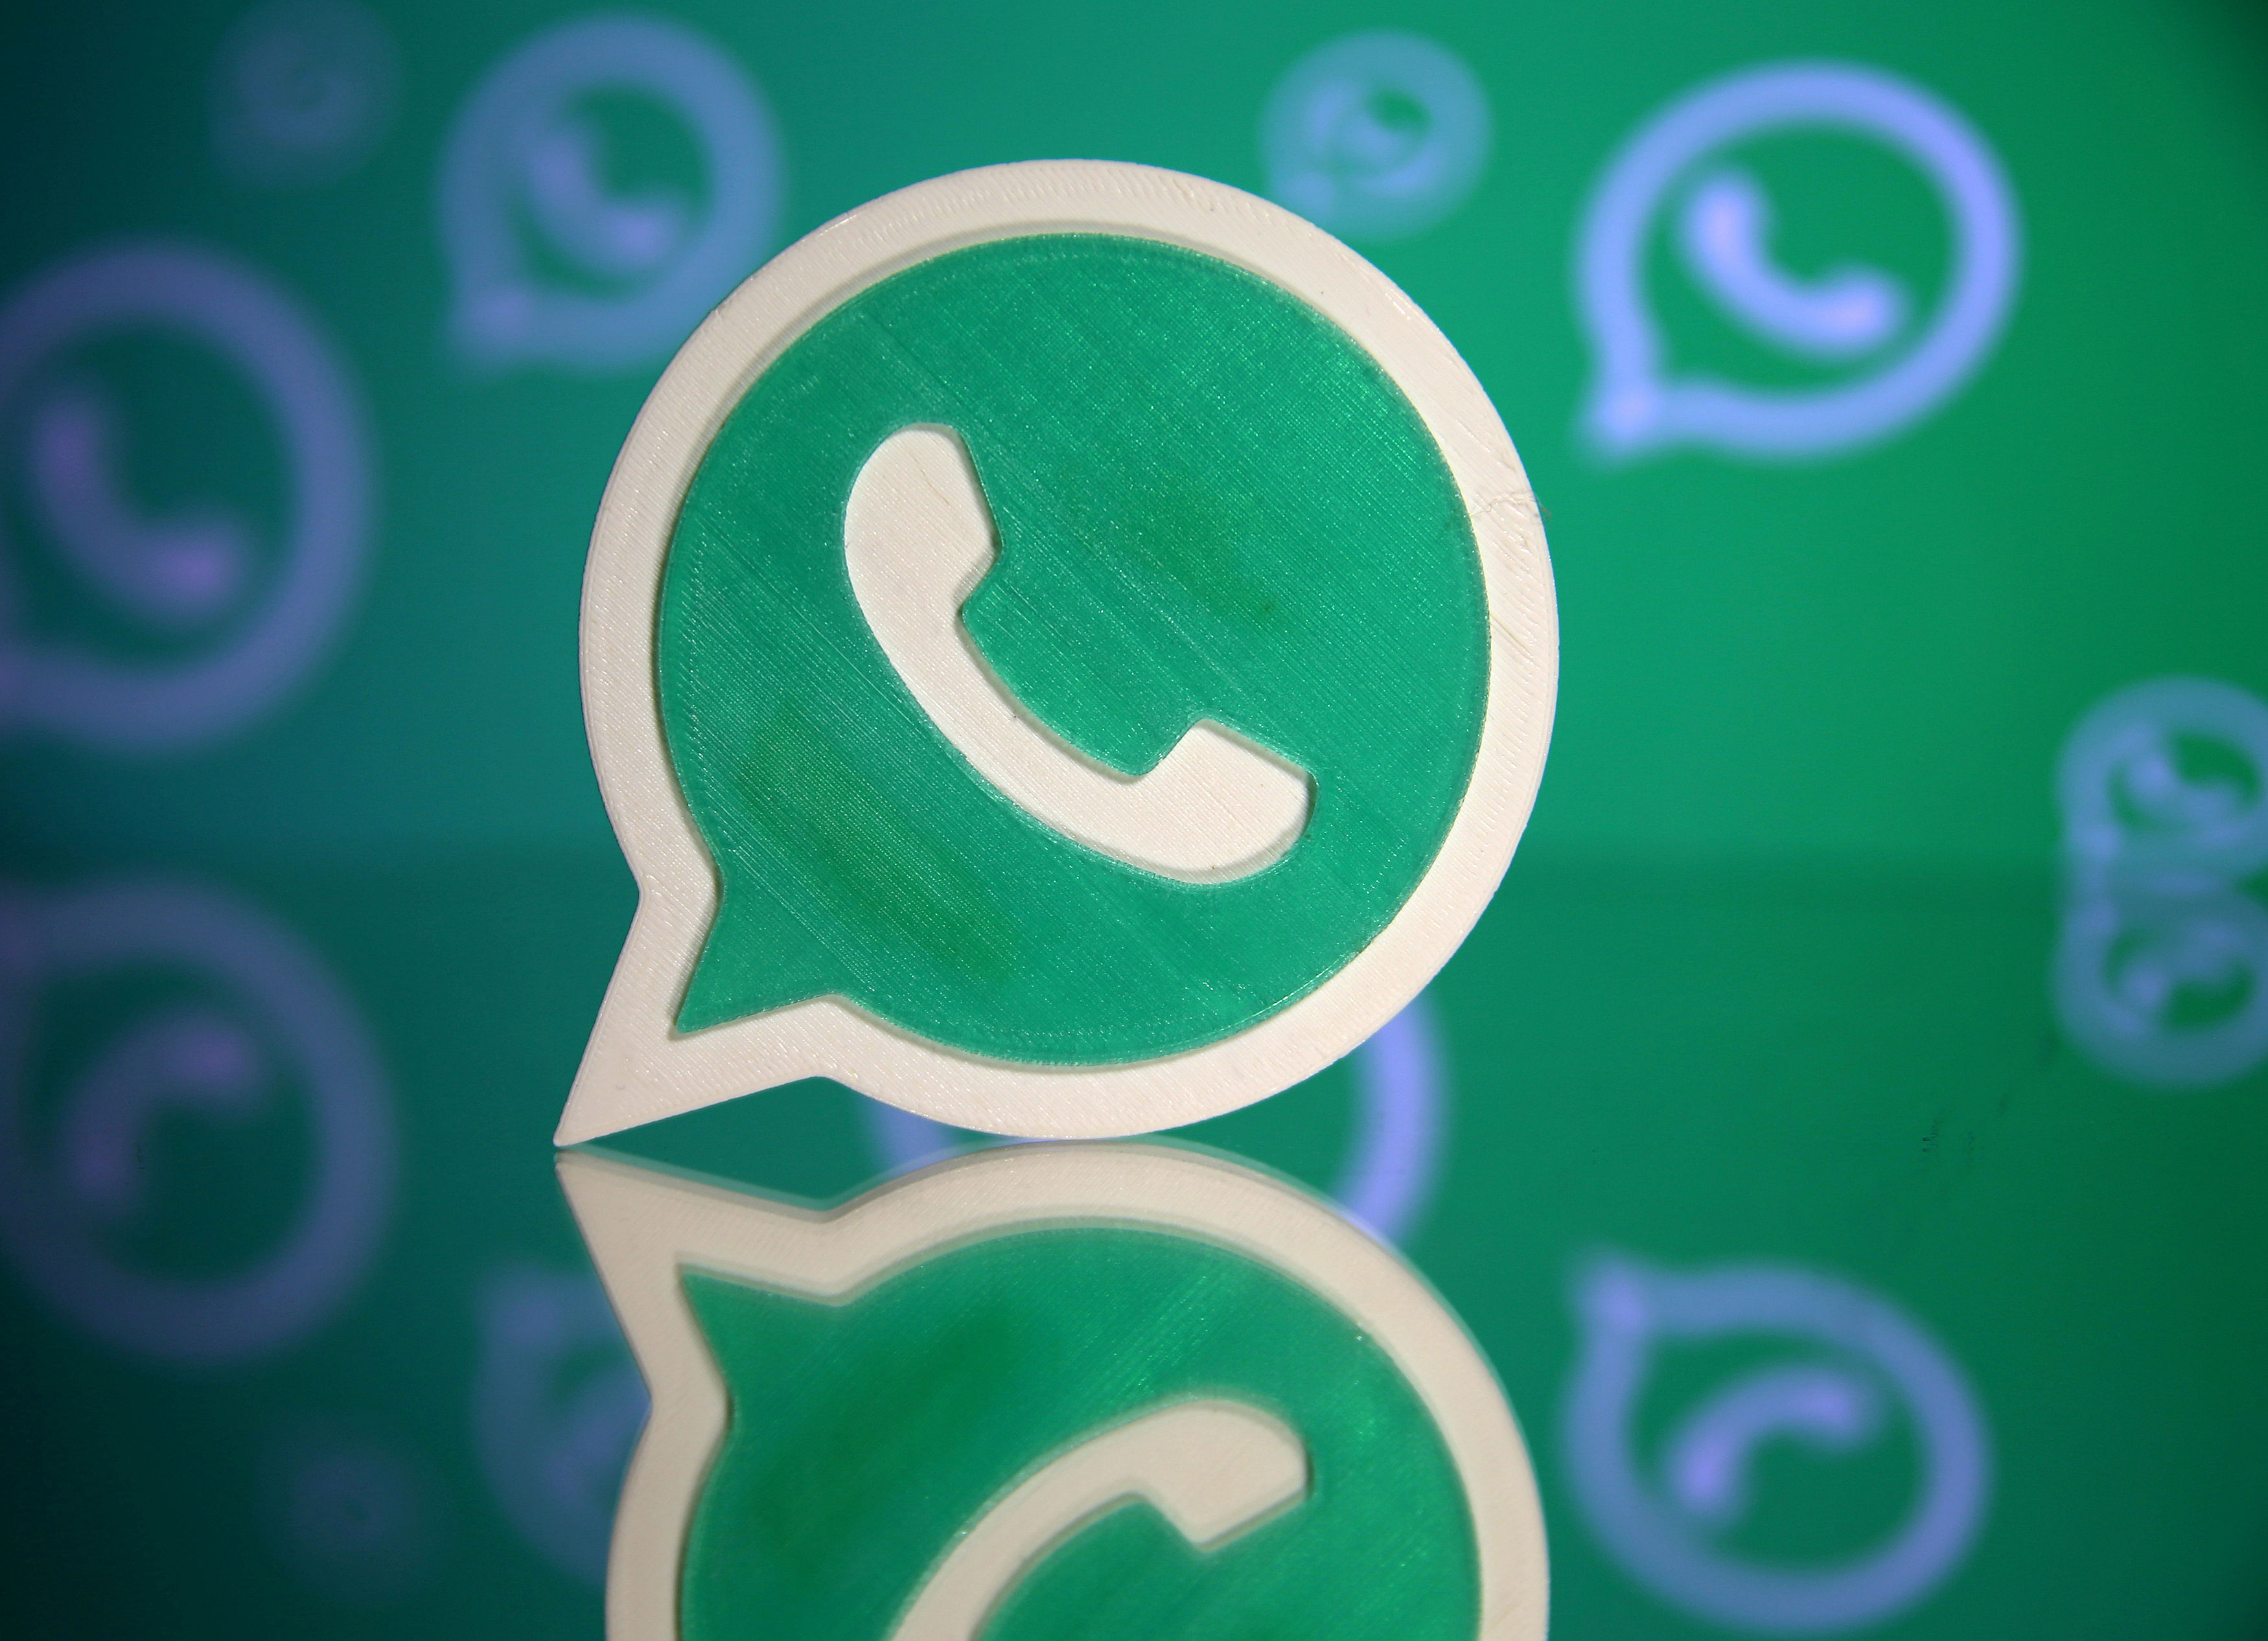 WhatsApp to get disappearing messages feature soon